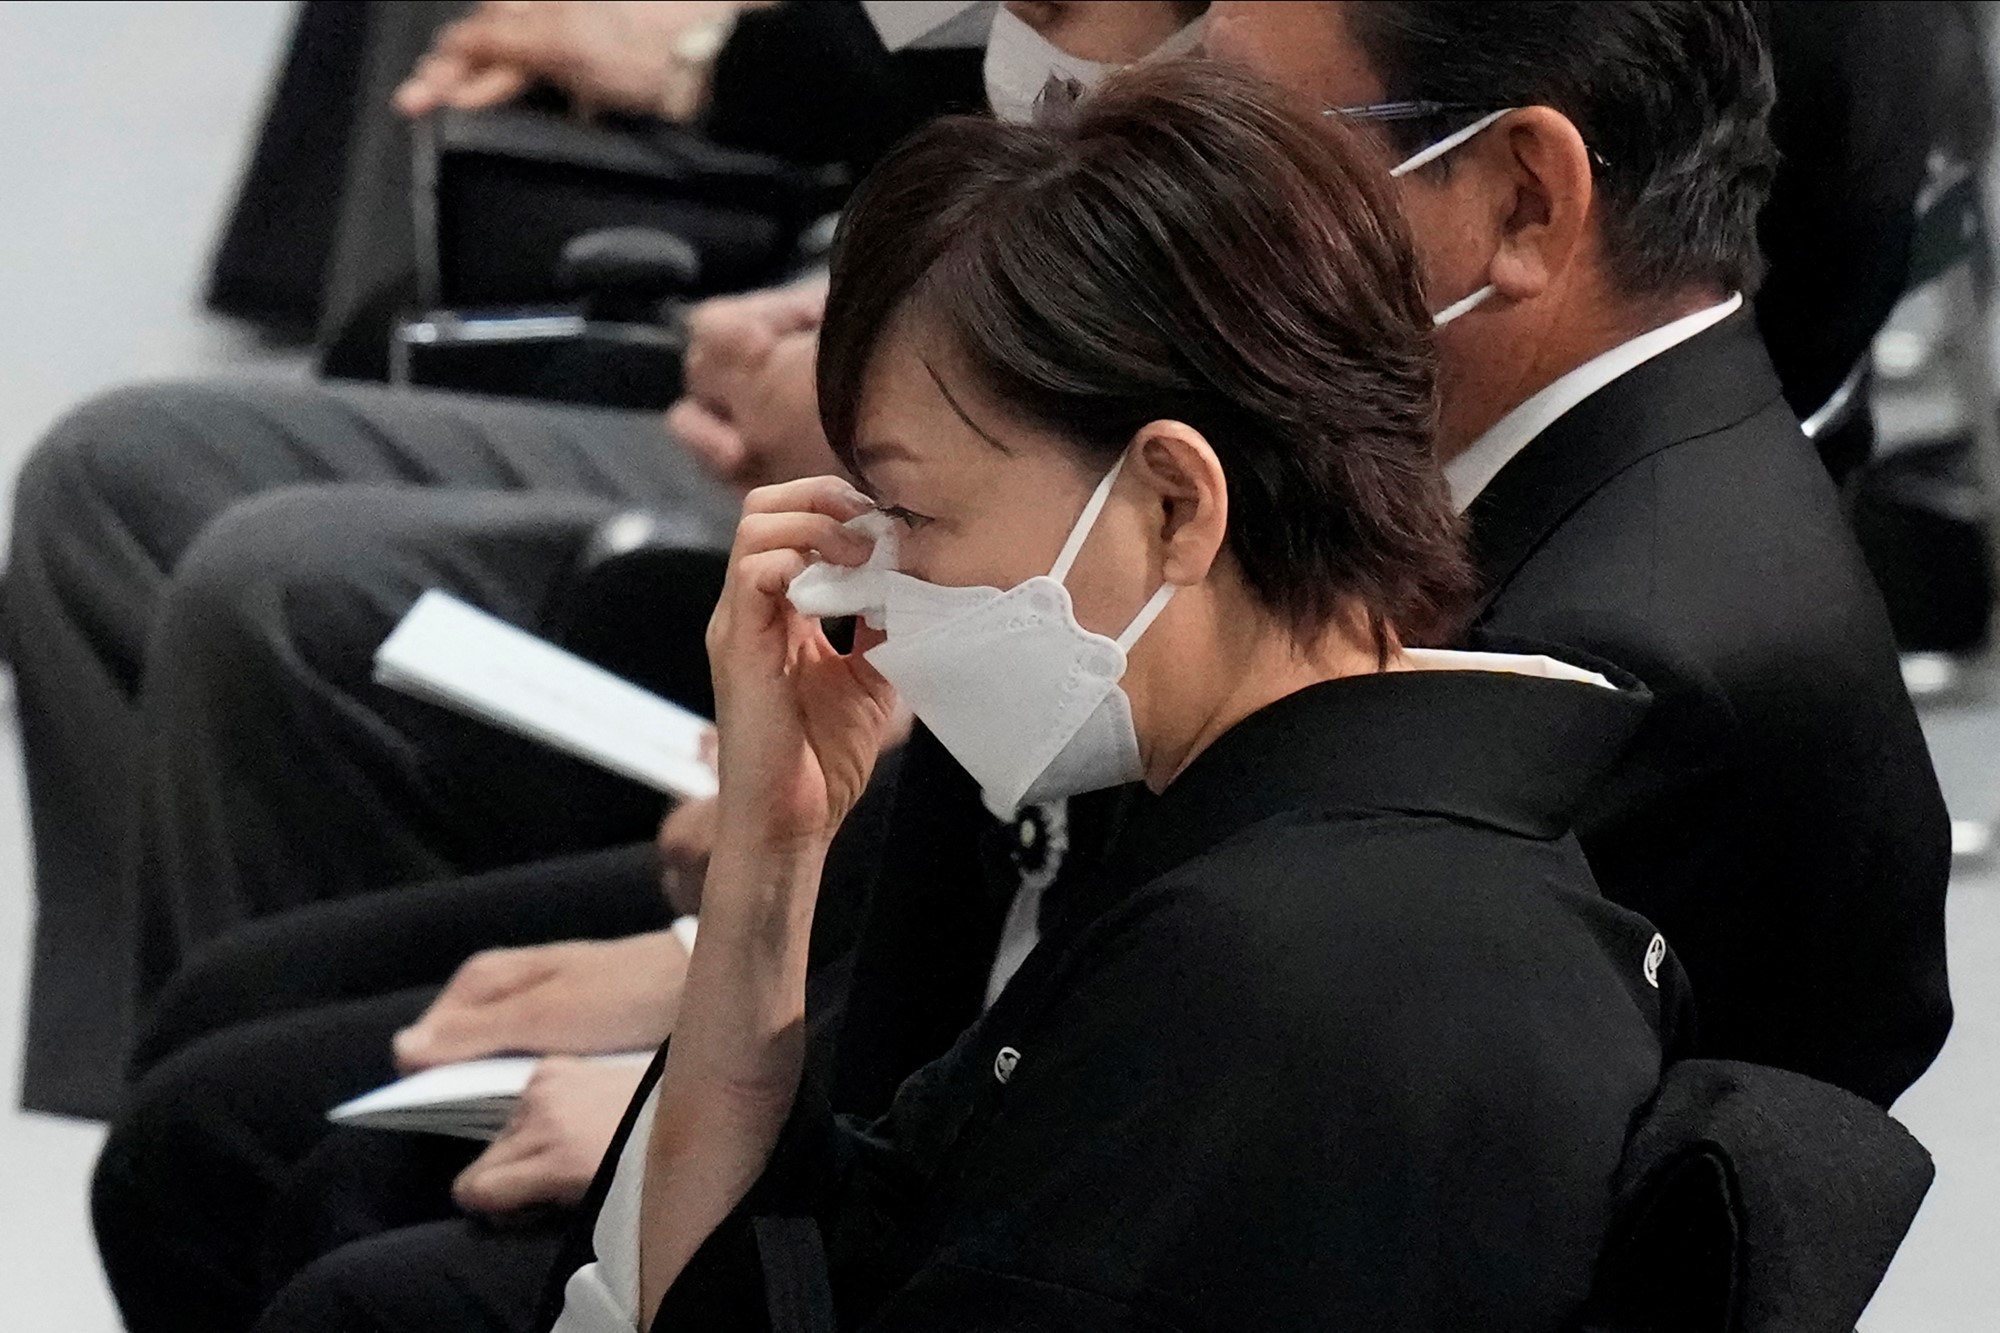 Akie Abe, widow of former Prime Minister of Japan Shinzo Abe, wipes away tears during the state funeral of her husband Tuesday Sept. 27, 2022, at Nippon Budokan i